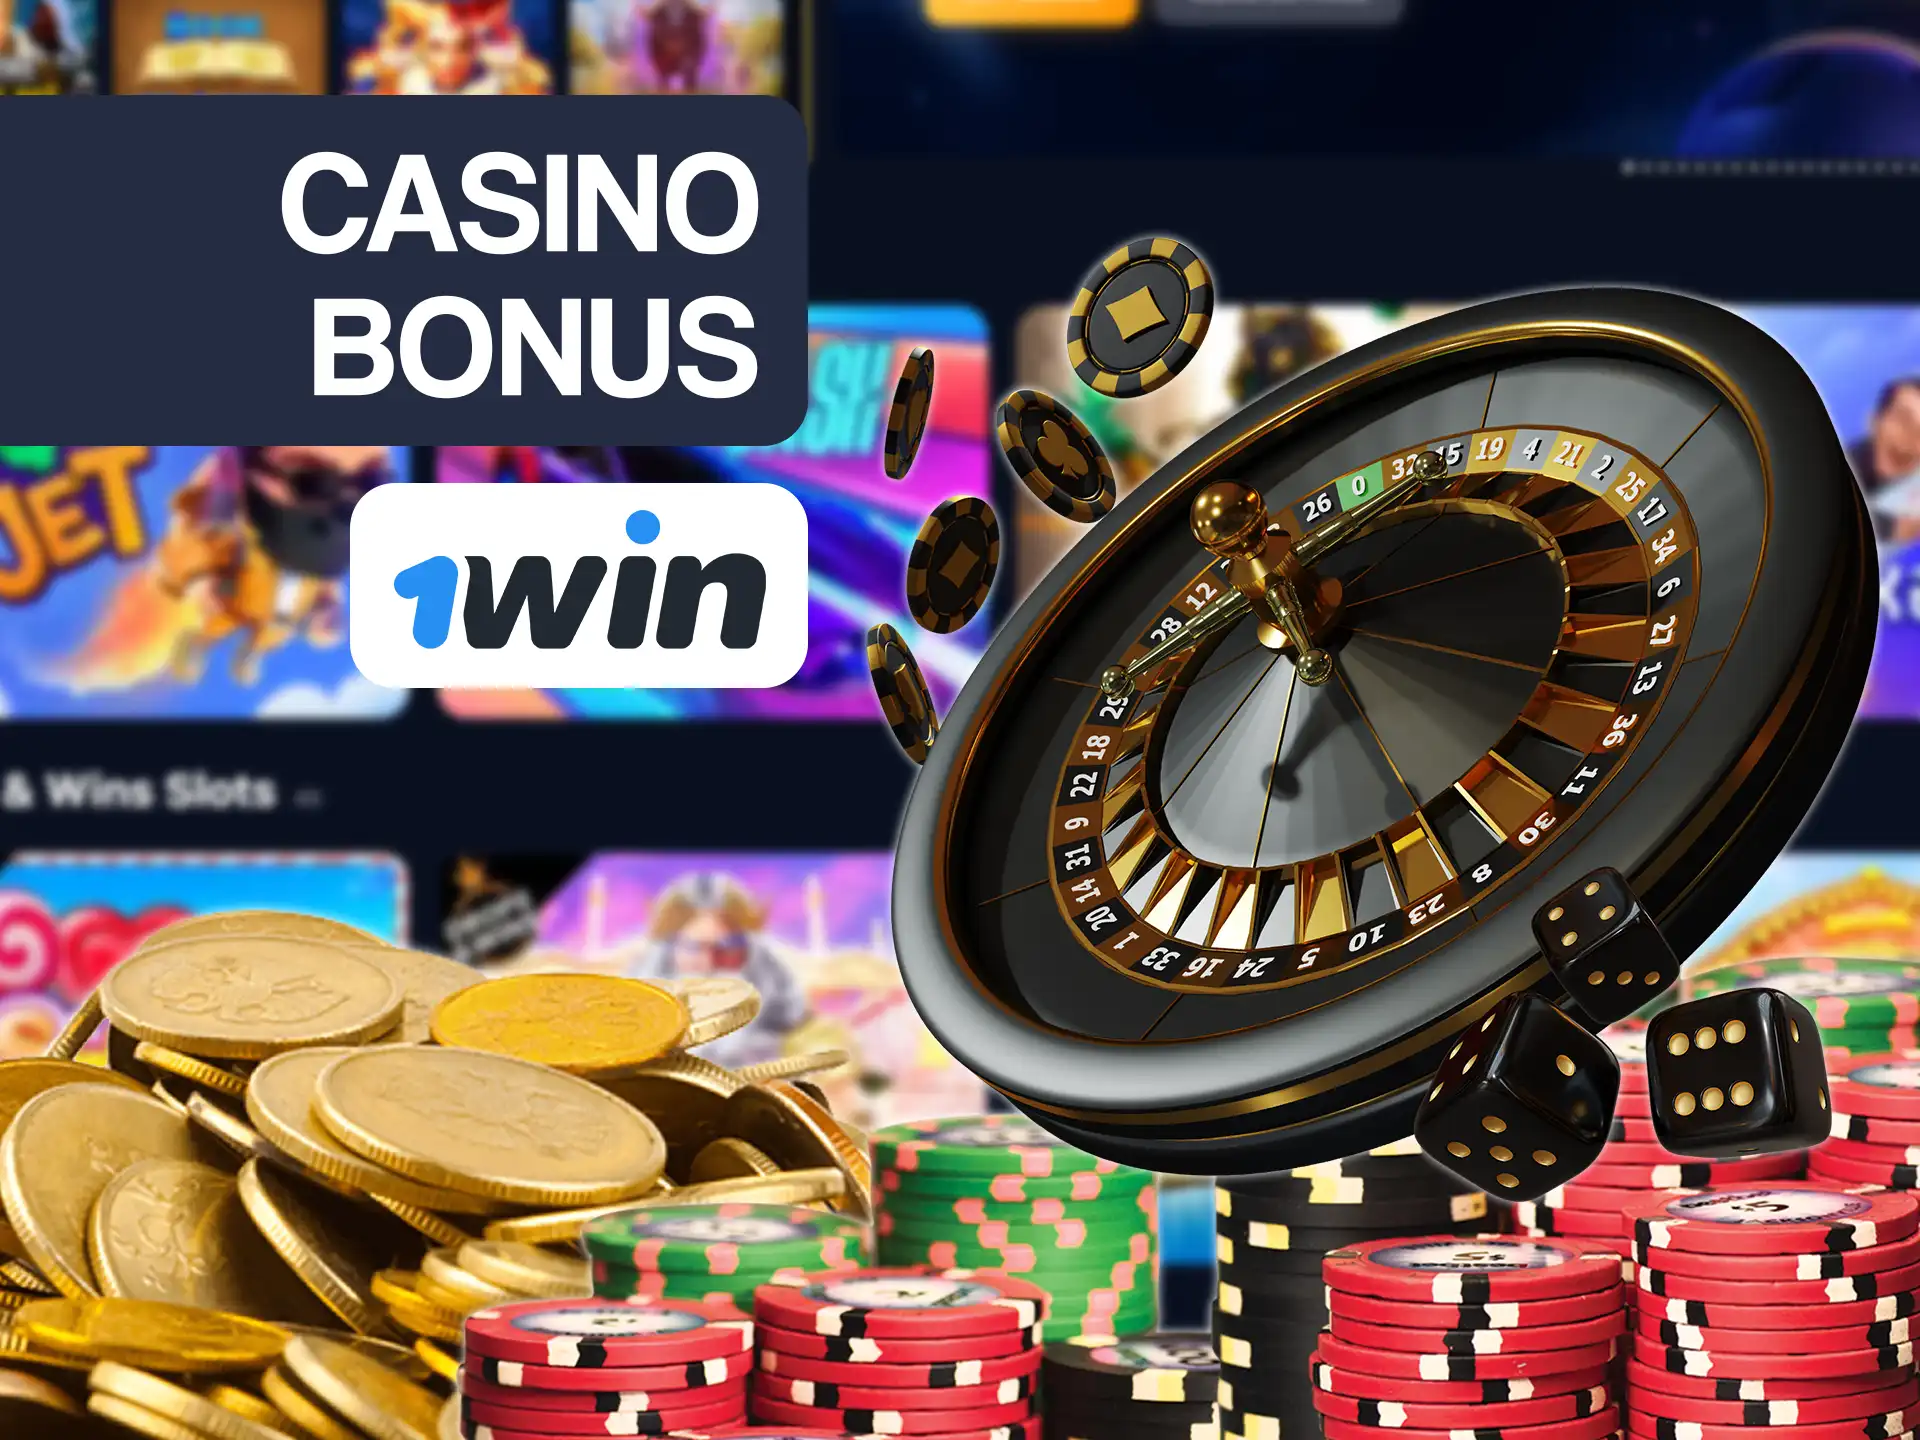 Get your casino bonus by playing casino games at 1win.